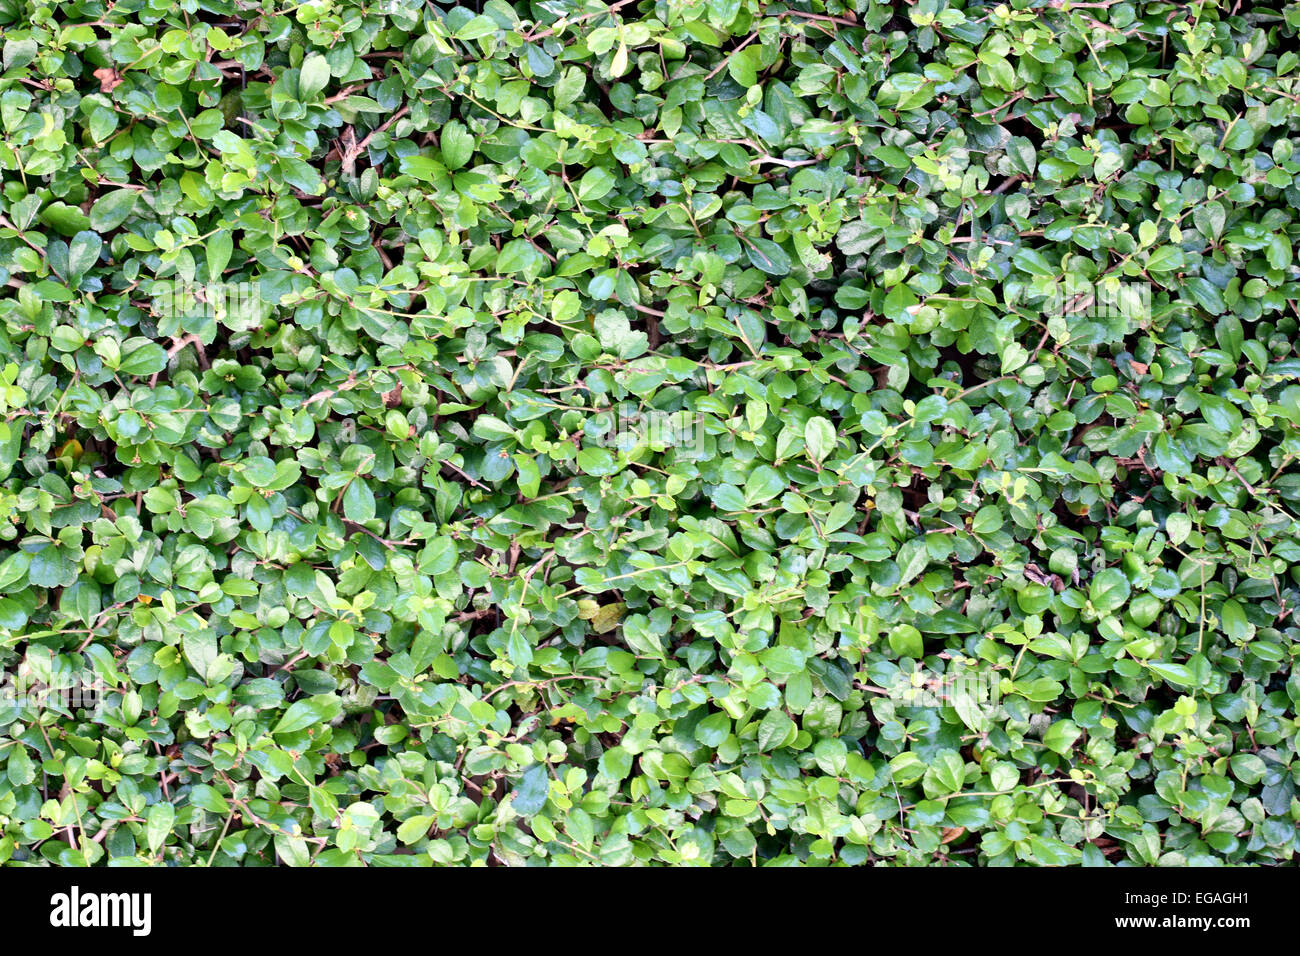 Green leaves in garden for the background image. Stock Photo